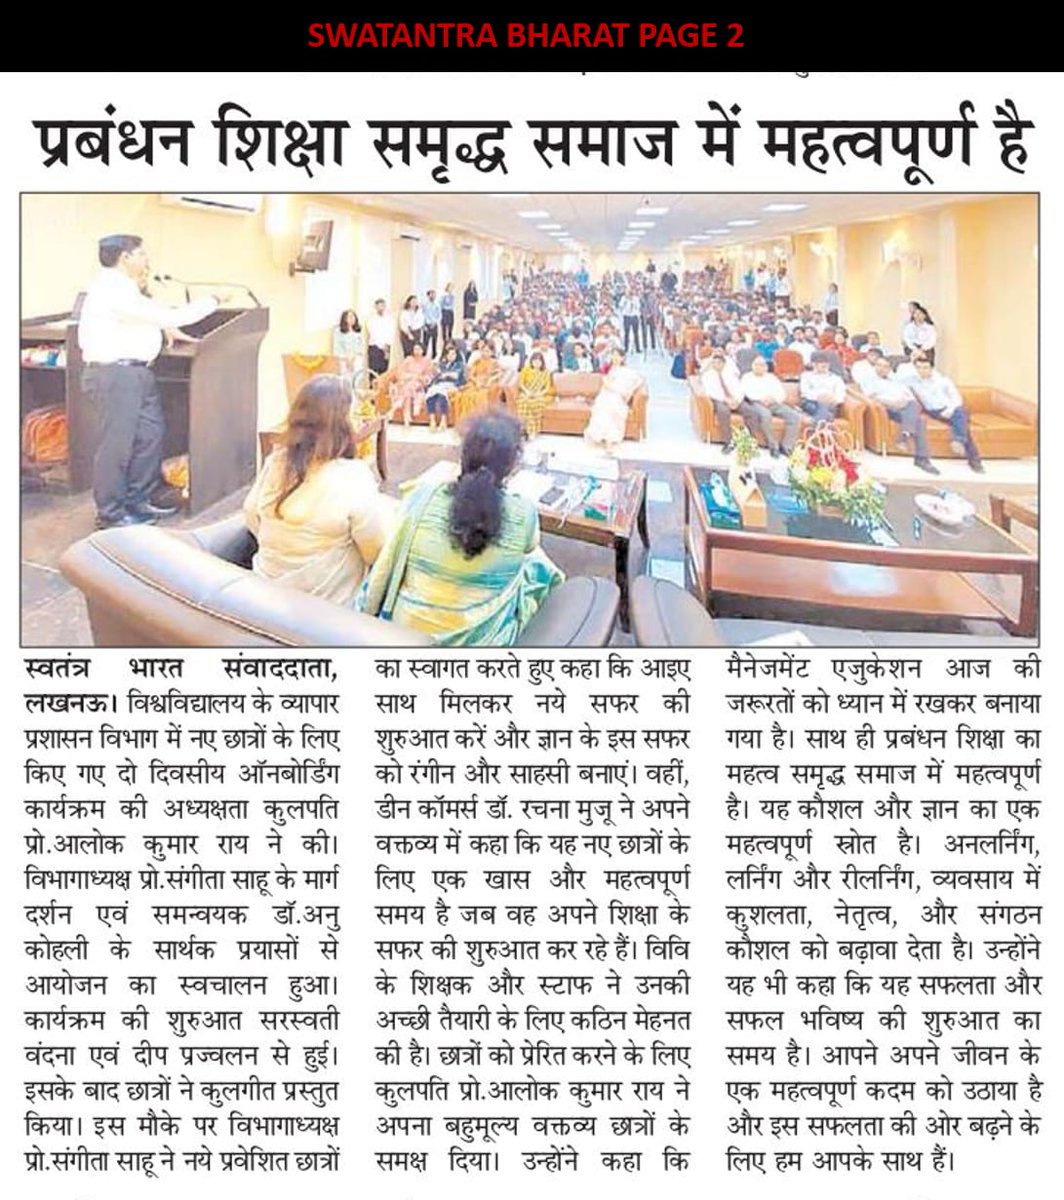 📰 Exciting start to the two-day onboarding program for MBA students at the University of Lucknow on 26th September 2023 !#Glimpse of the inaugural session. 🎓✨ #MBA #Onboarding #UniversityofLucknow #NewStudents
@sangeeta_hr